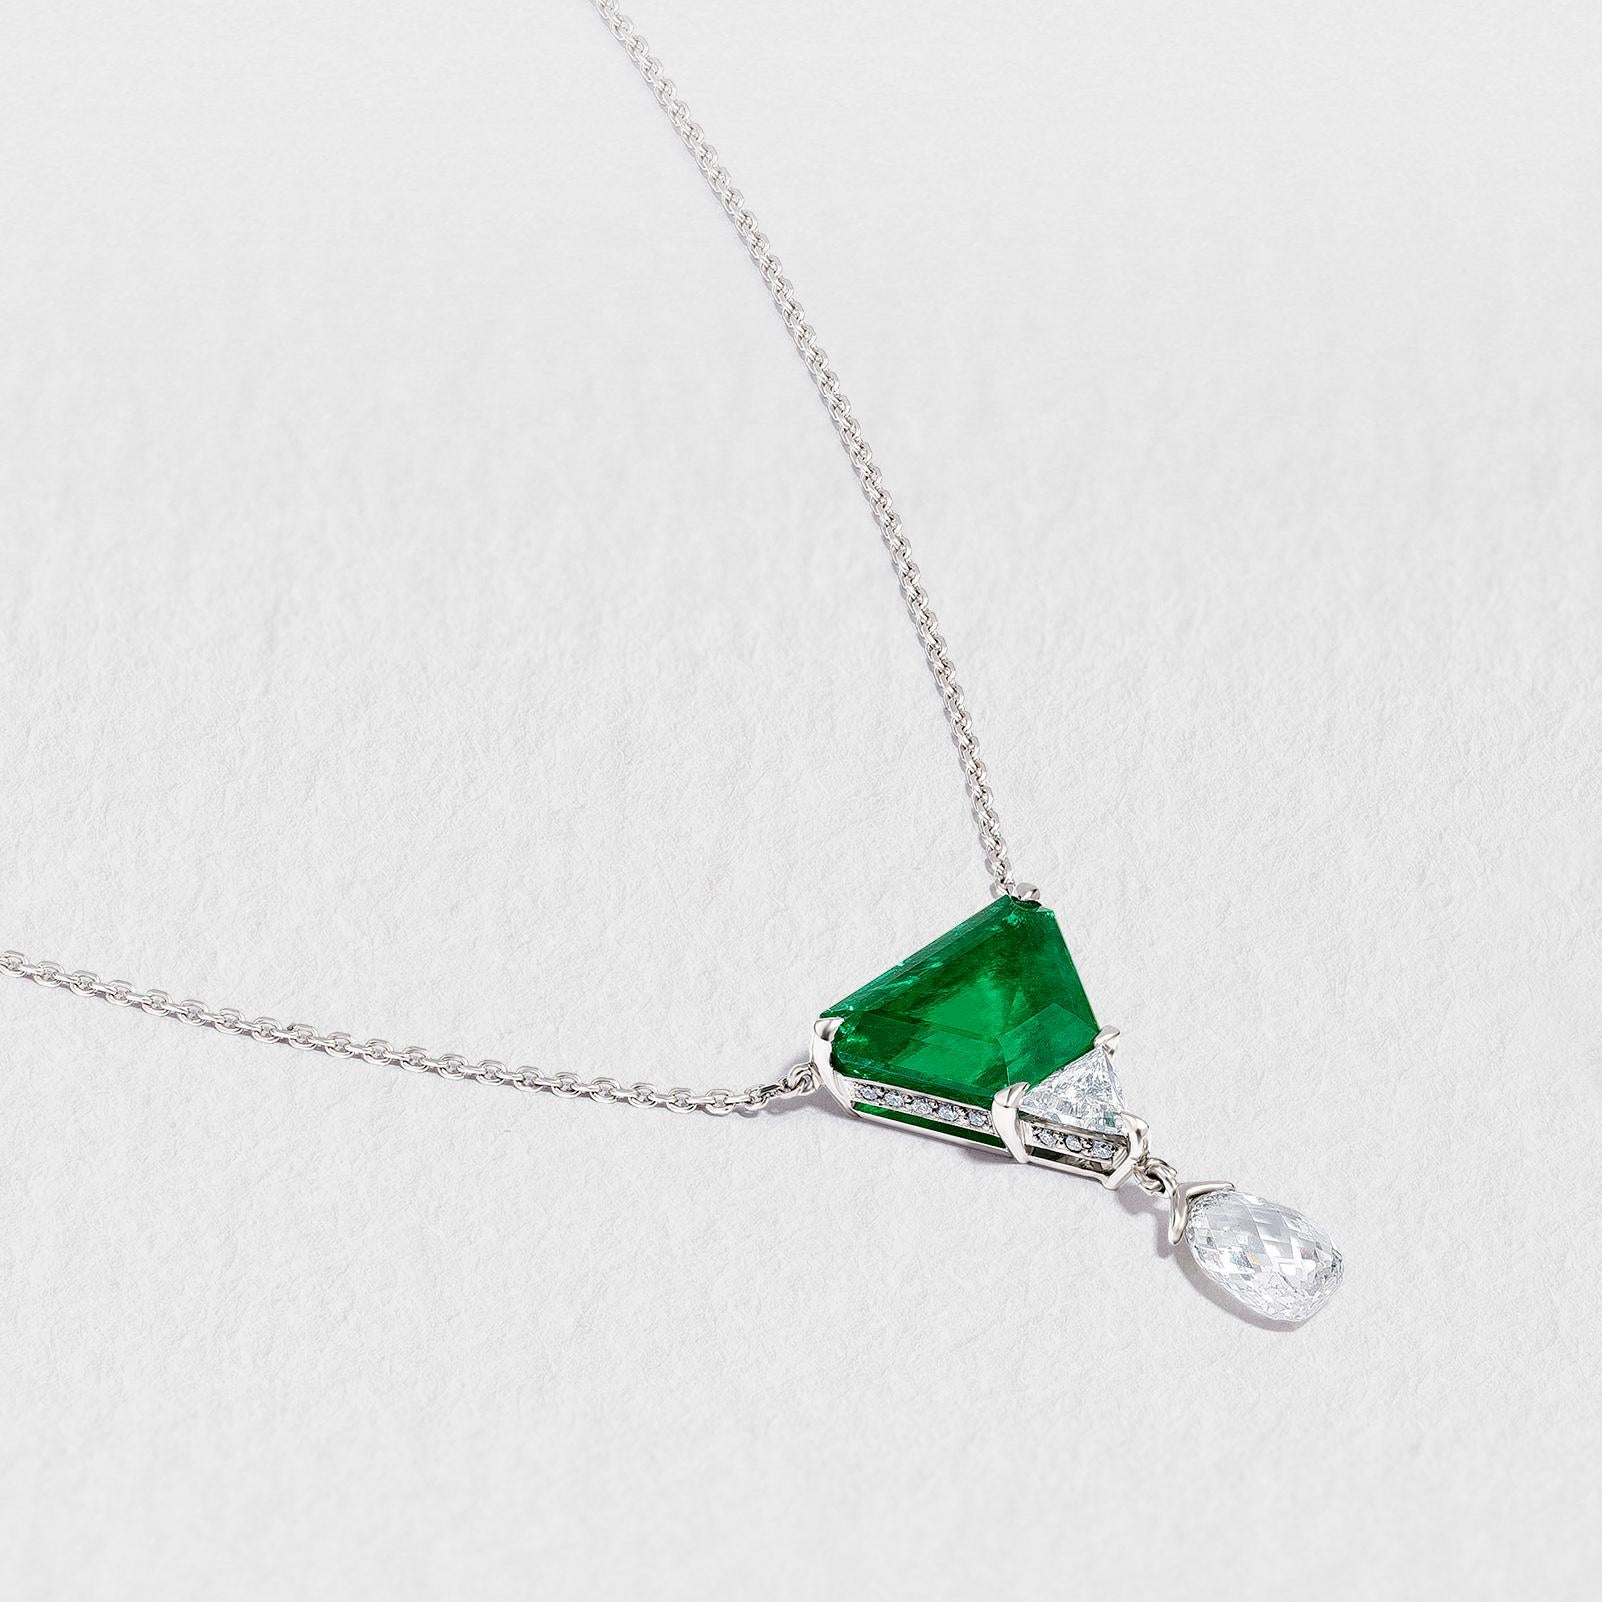 Crafted by hand in the Haruni workshop, this unique necklace features an impressive deep-green Colombian emerald in a shield cut, and a smaller shield cut white diamond. The stones' angular beauty is offset by a delicate briolette diamond